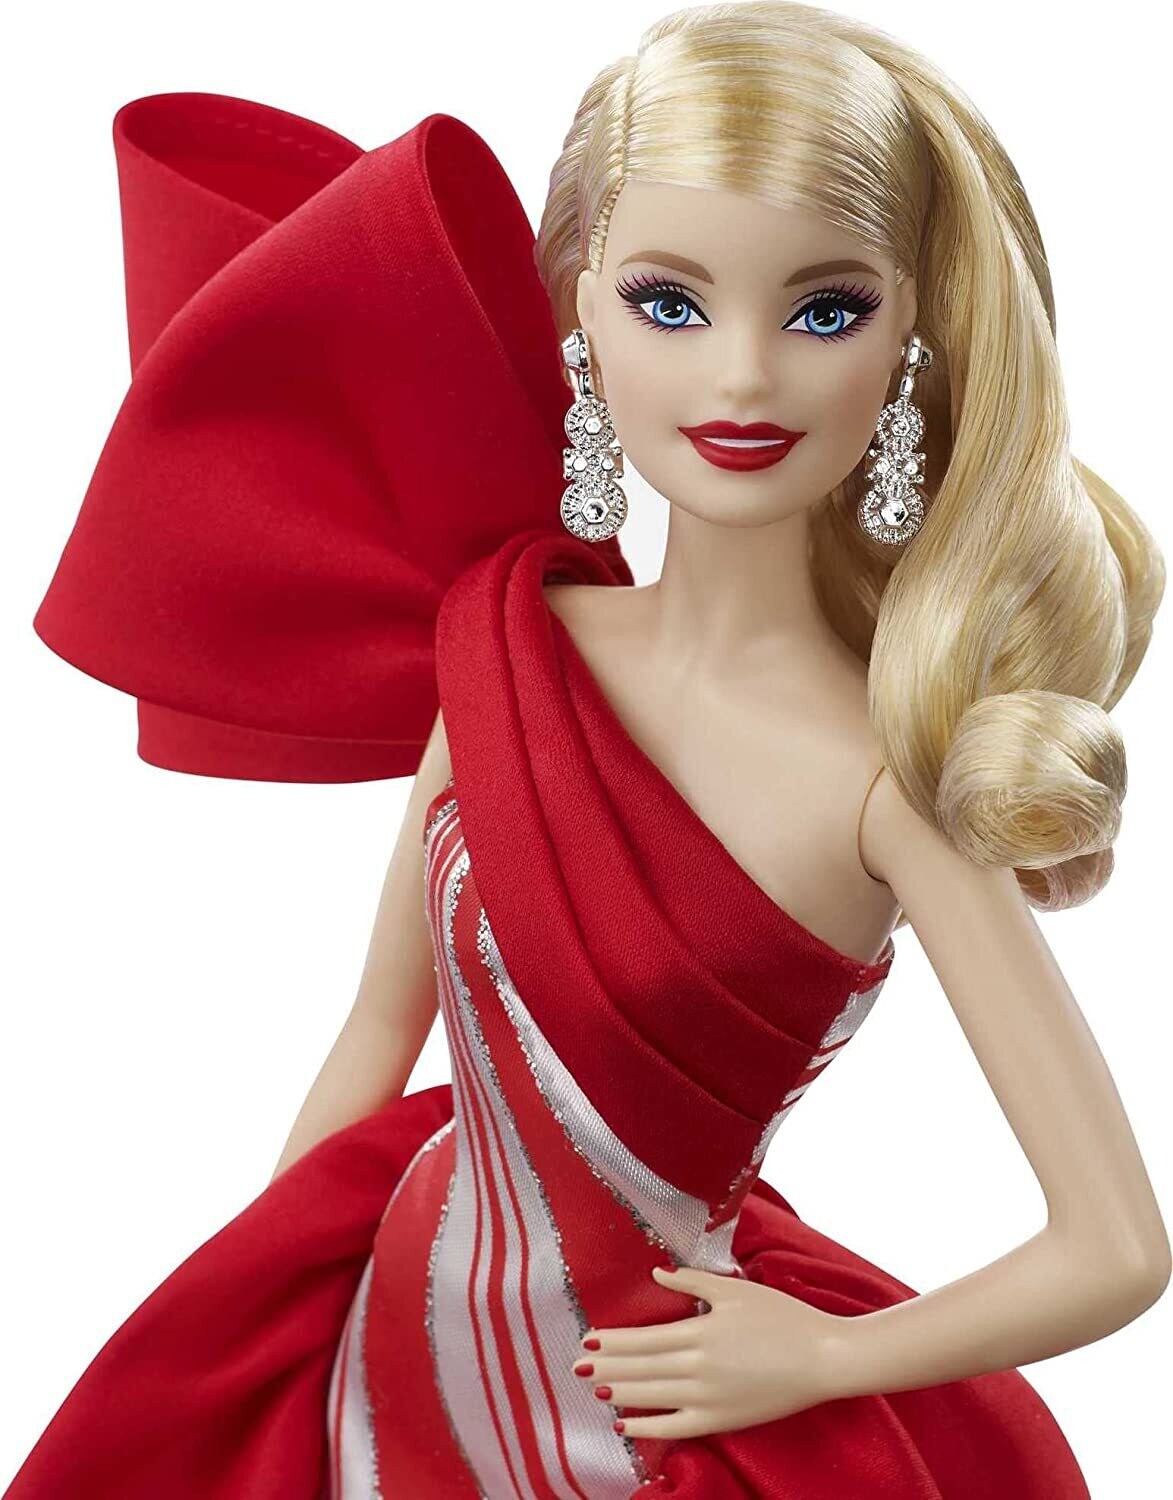 2019 Holiday Barbie Doll